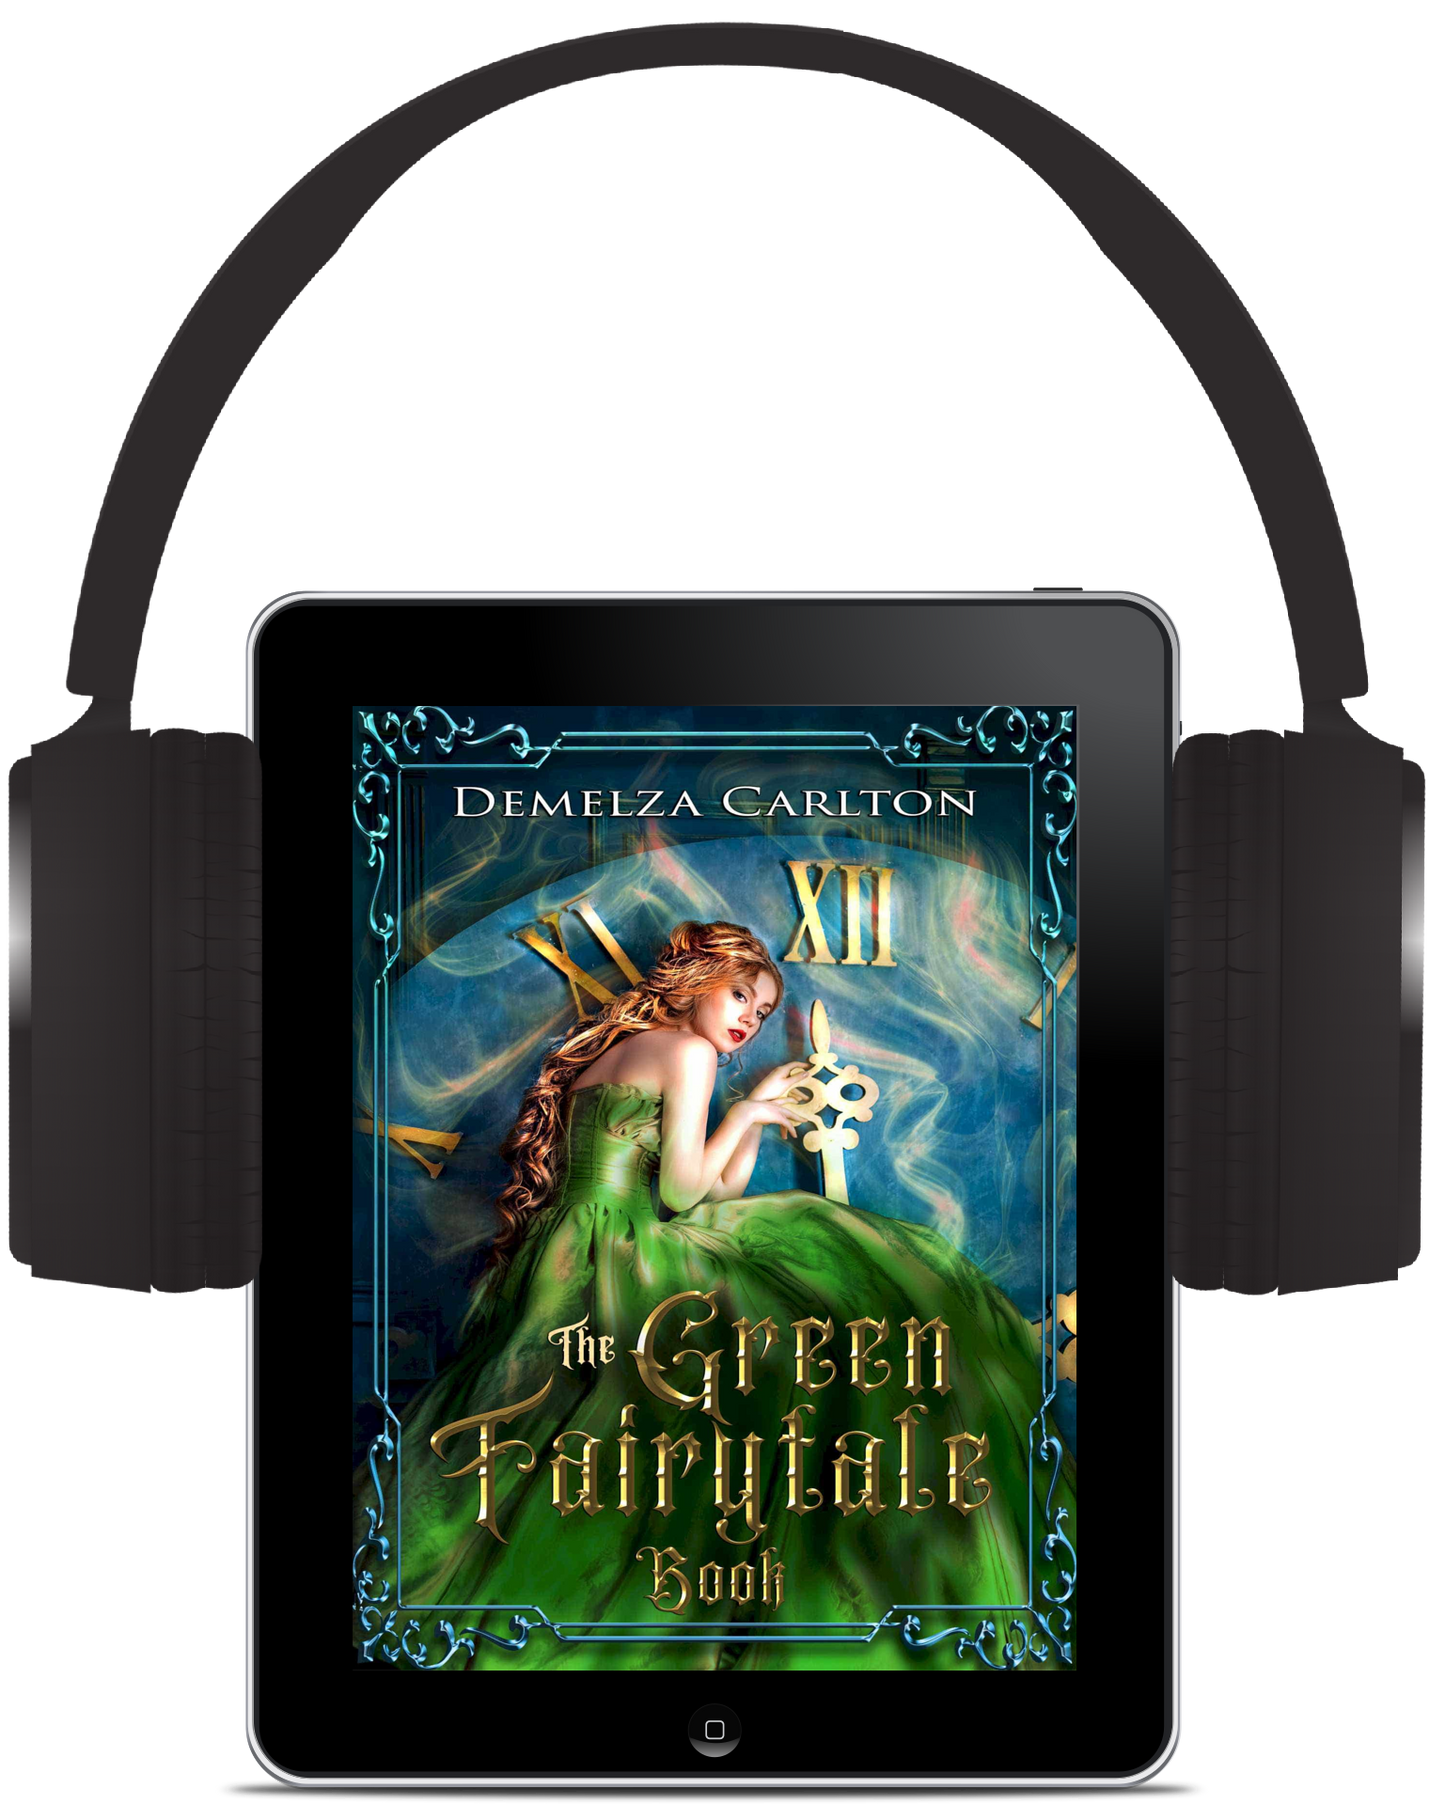 The Green Fairytale Book (Book 9-13 in the Romance a Medieval Fairytale series) AUDIOBOOK